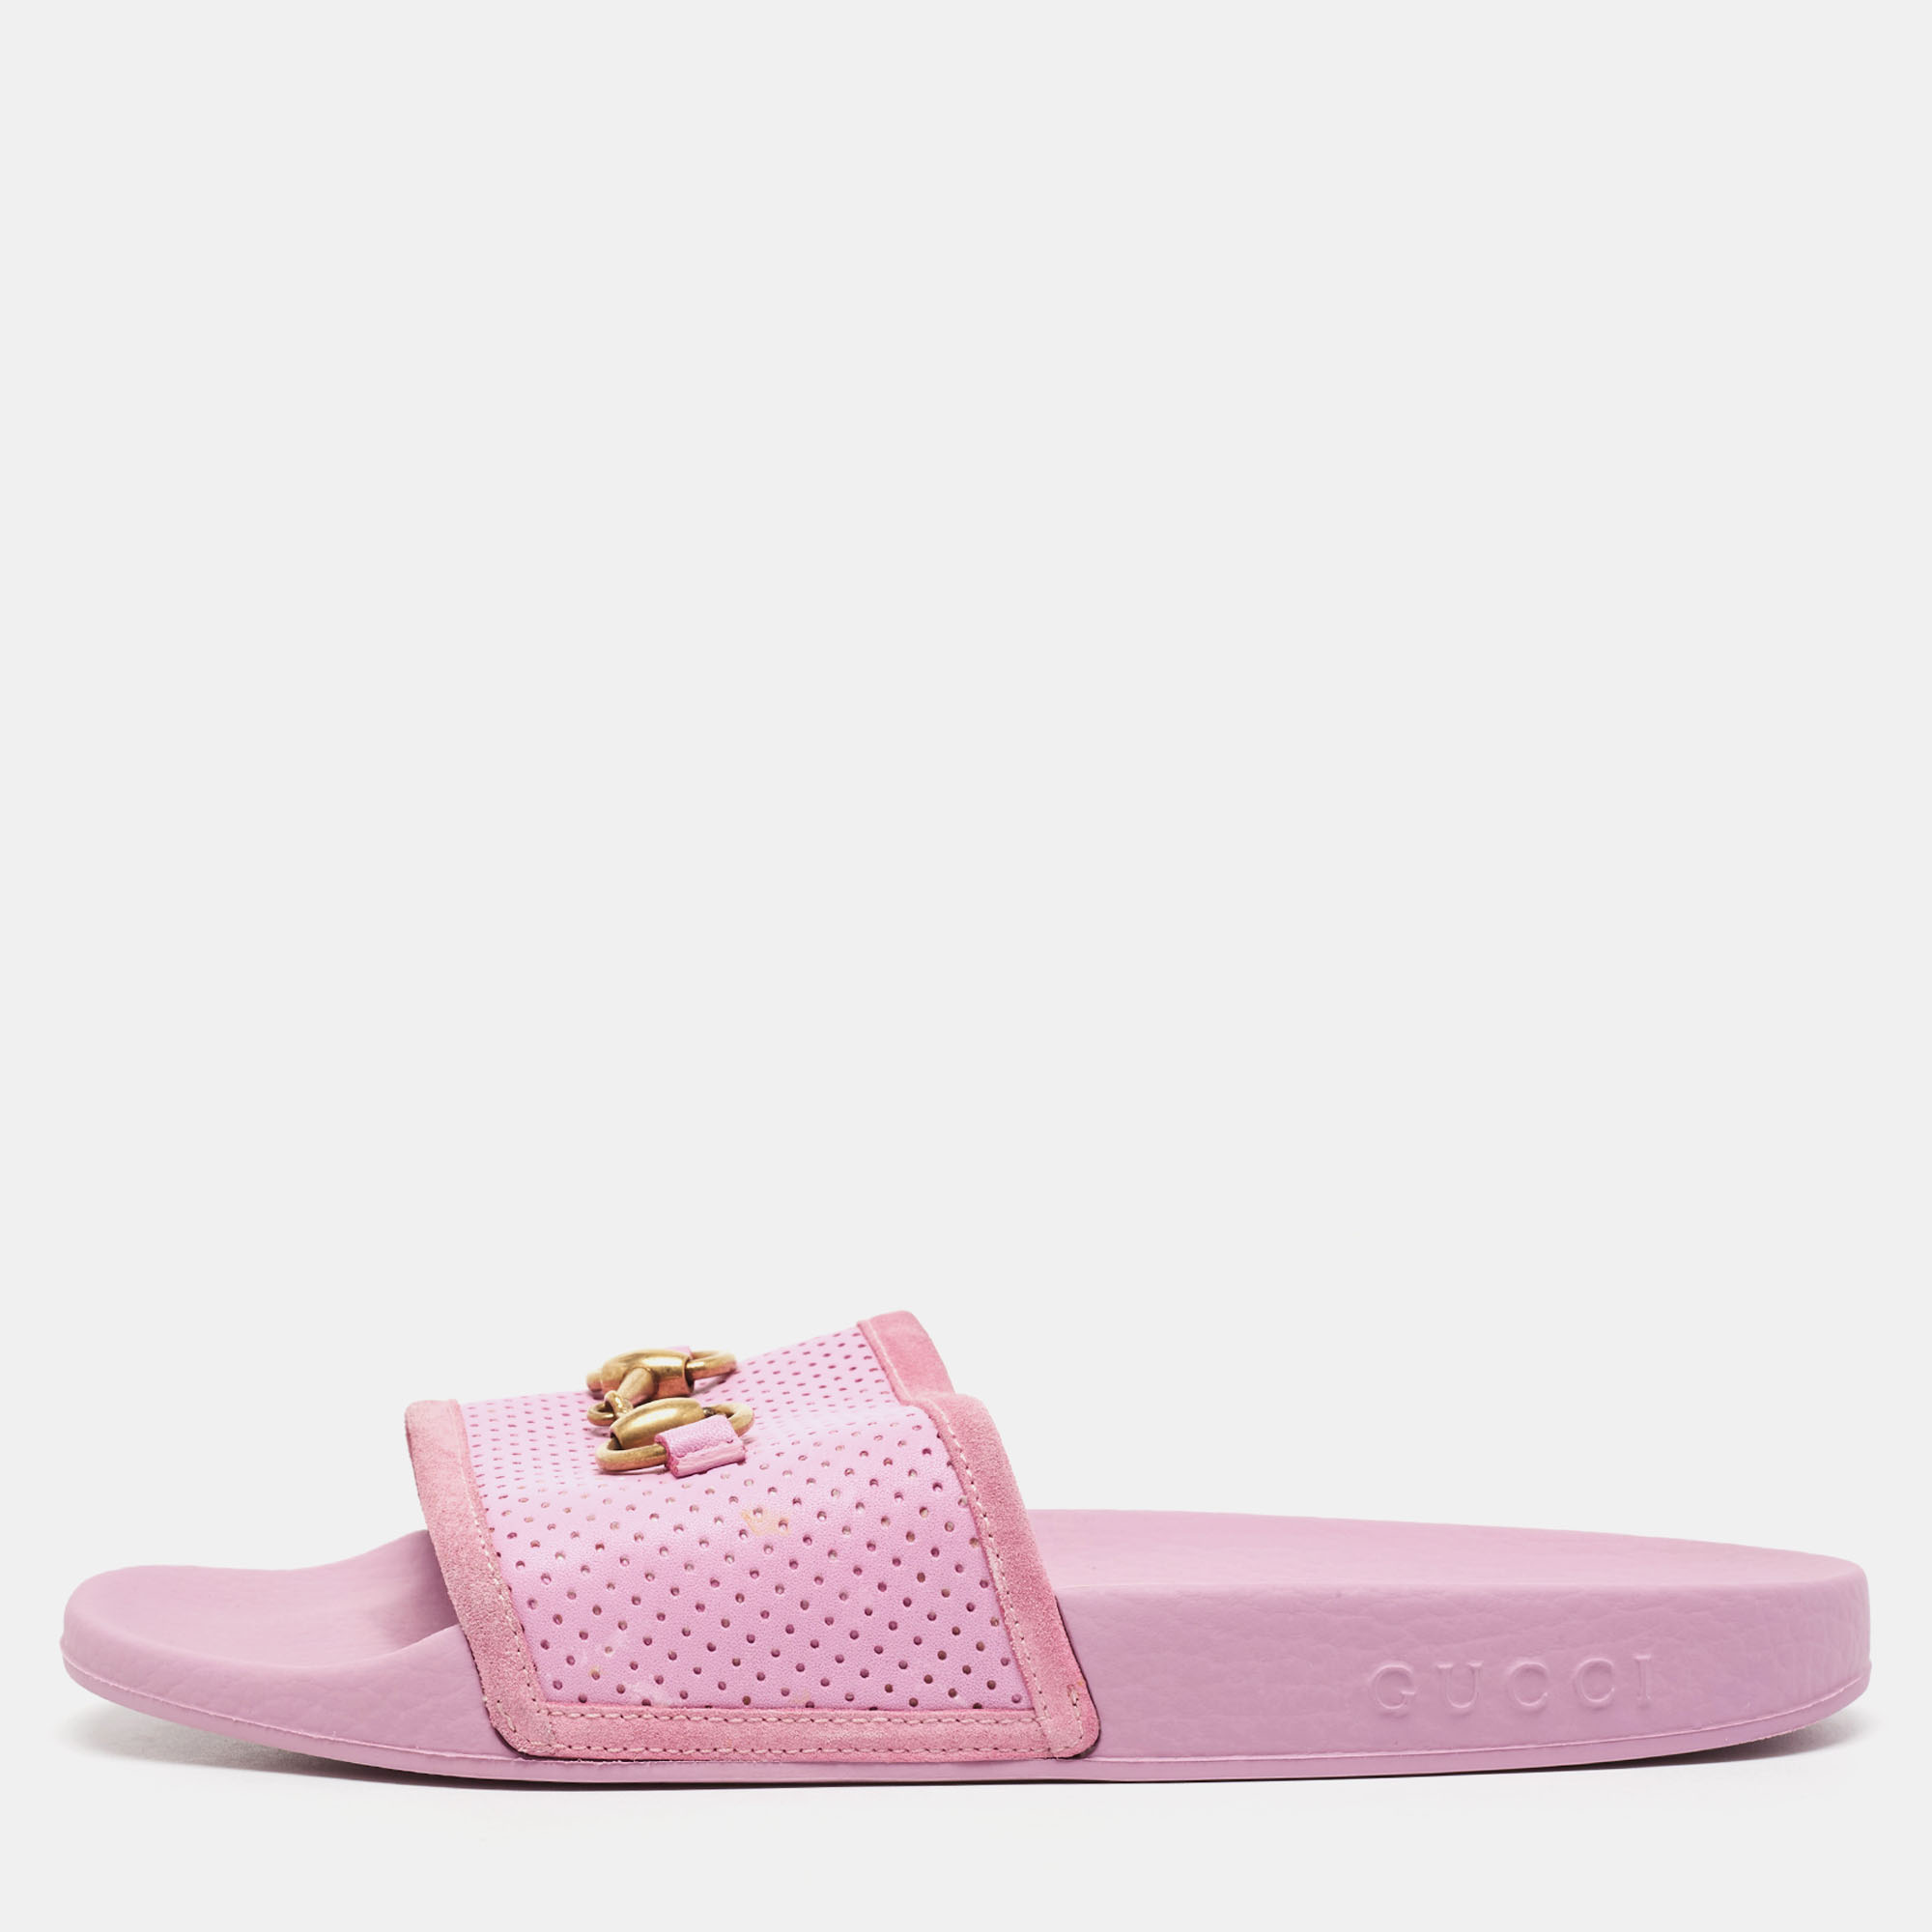 Gucci Purple Perforated Leather Horsebit Slides Size 39